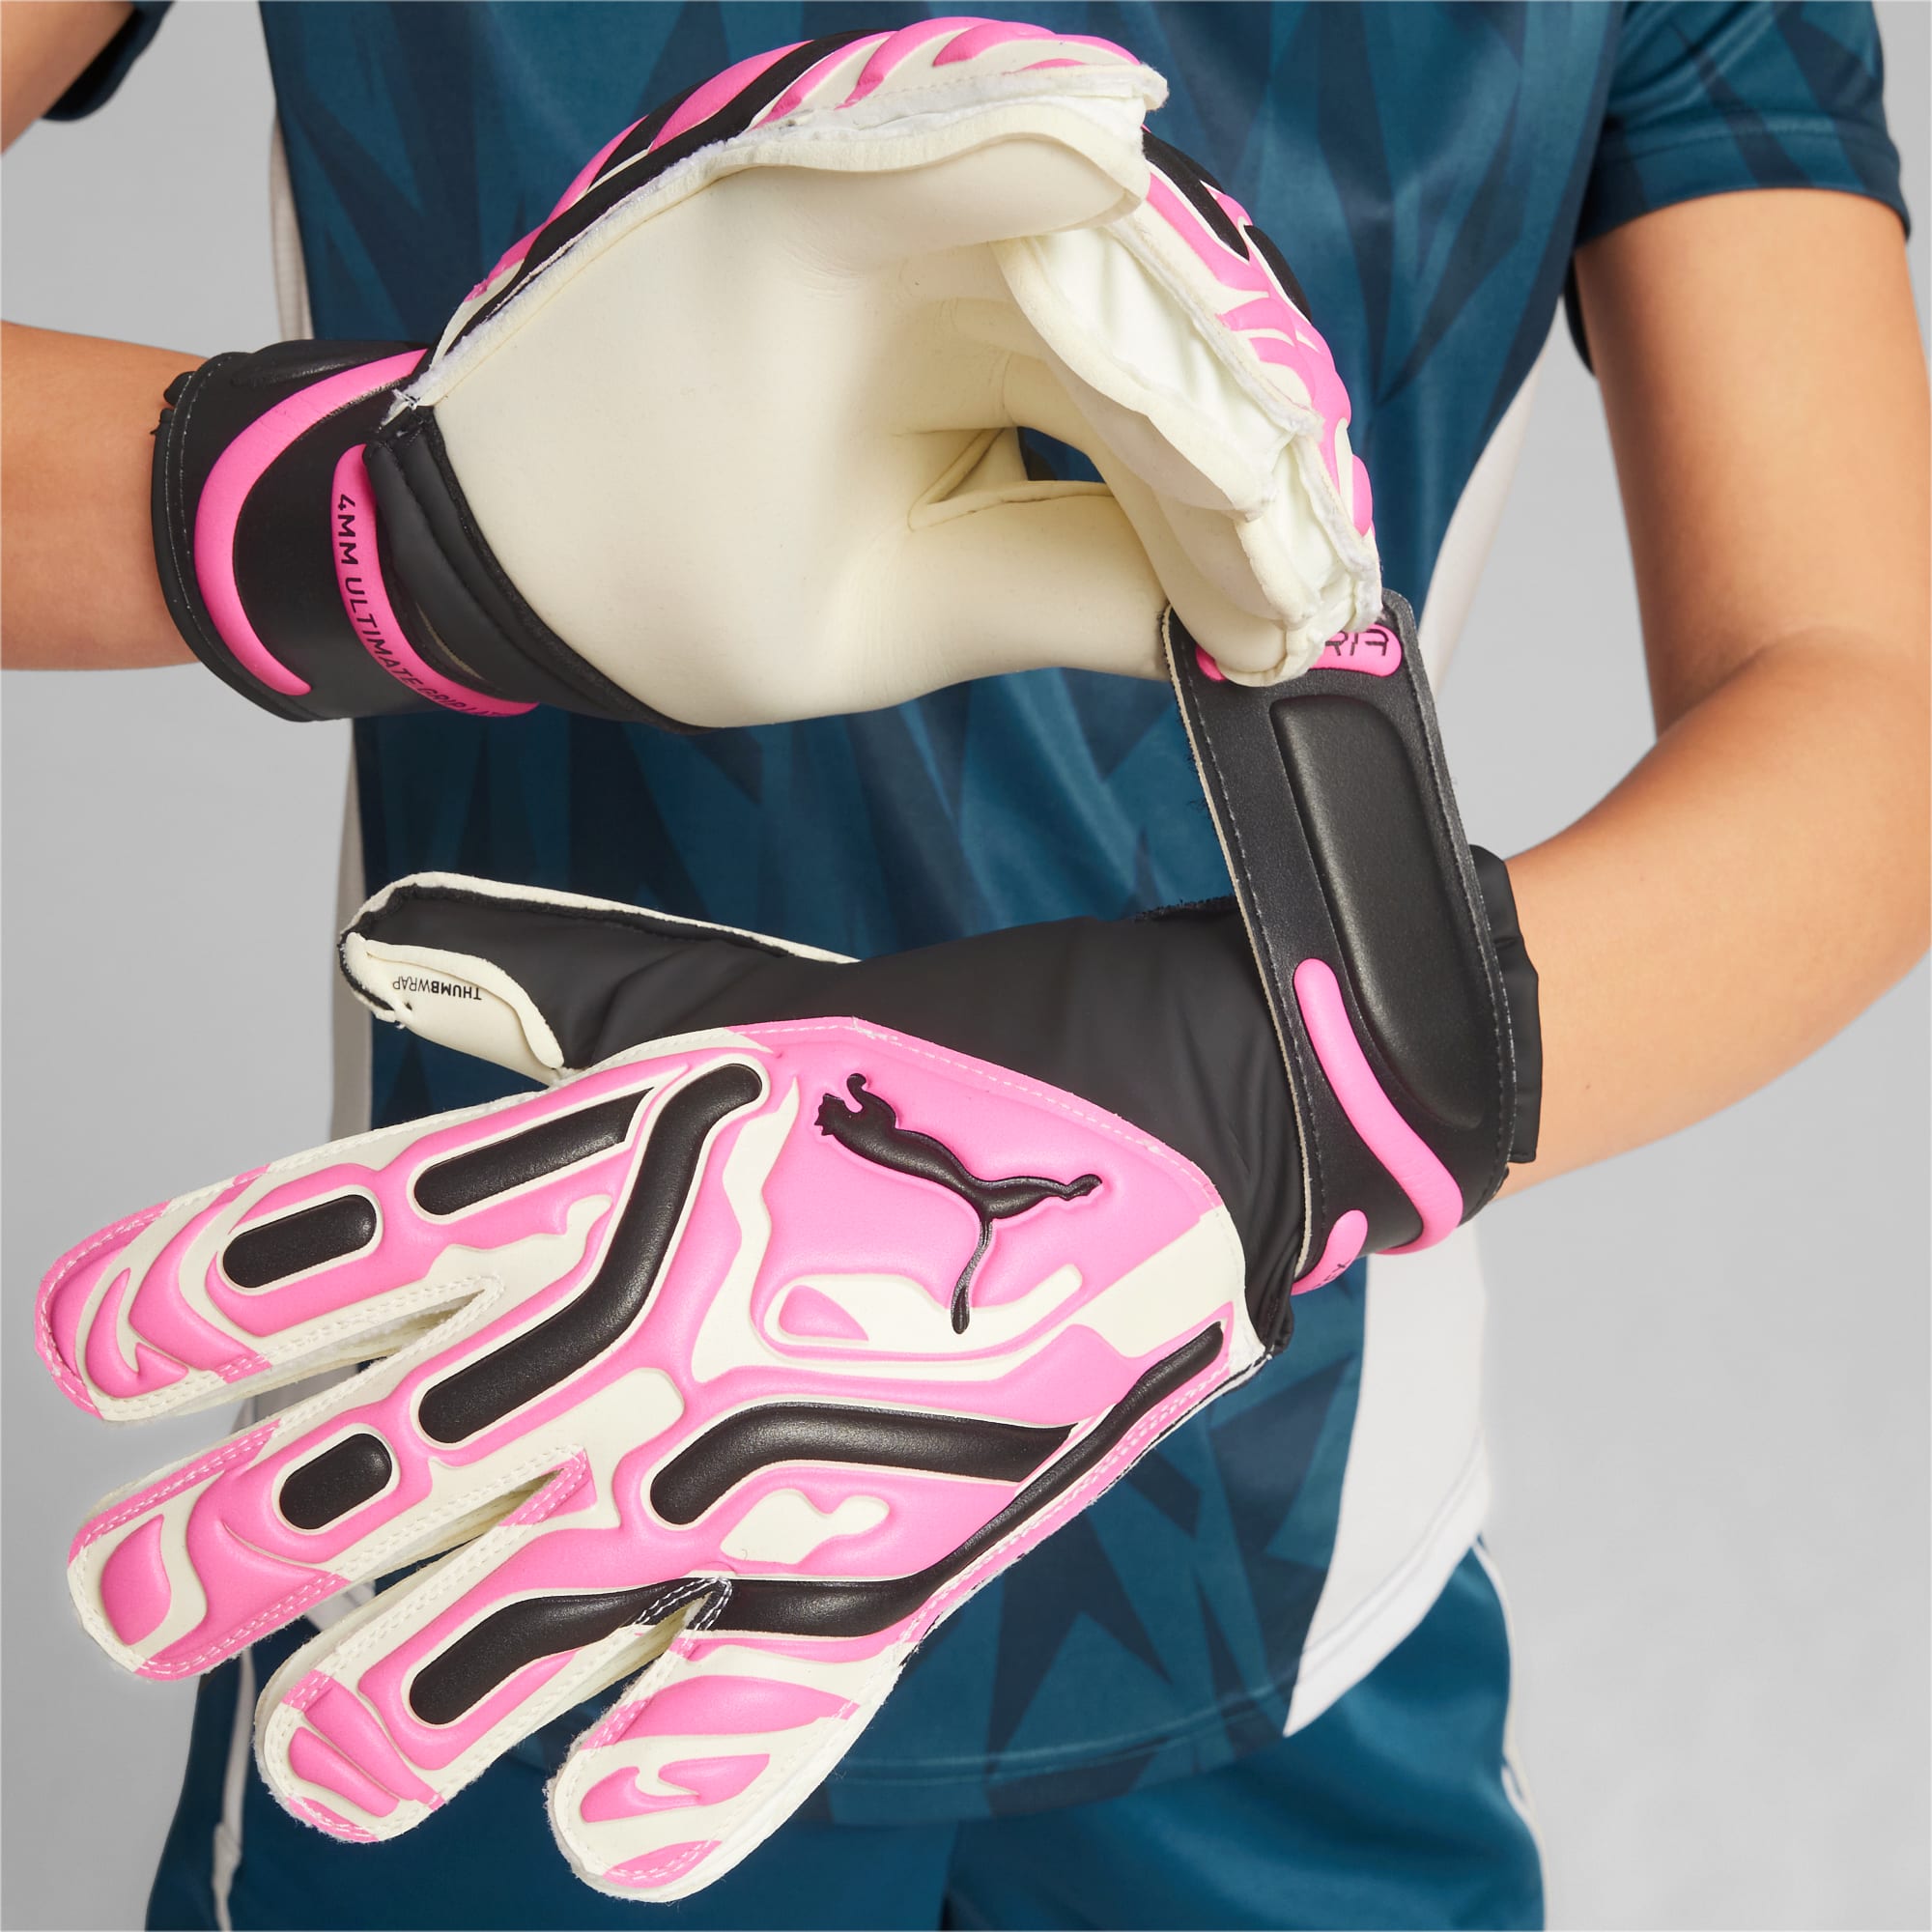 PUMA Ultra Match Protect Youth Goalkeeper Gloves, Poison Pink/White/Black, Size 6, Accessories